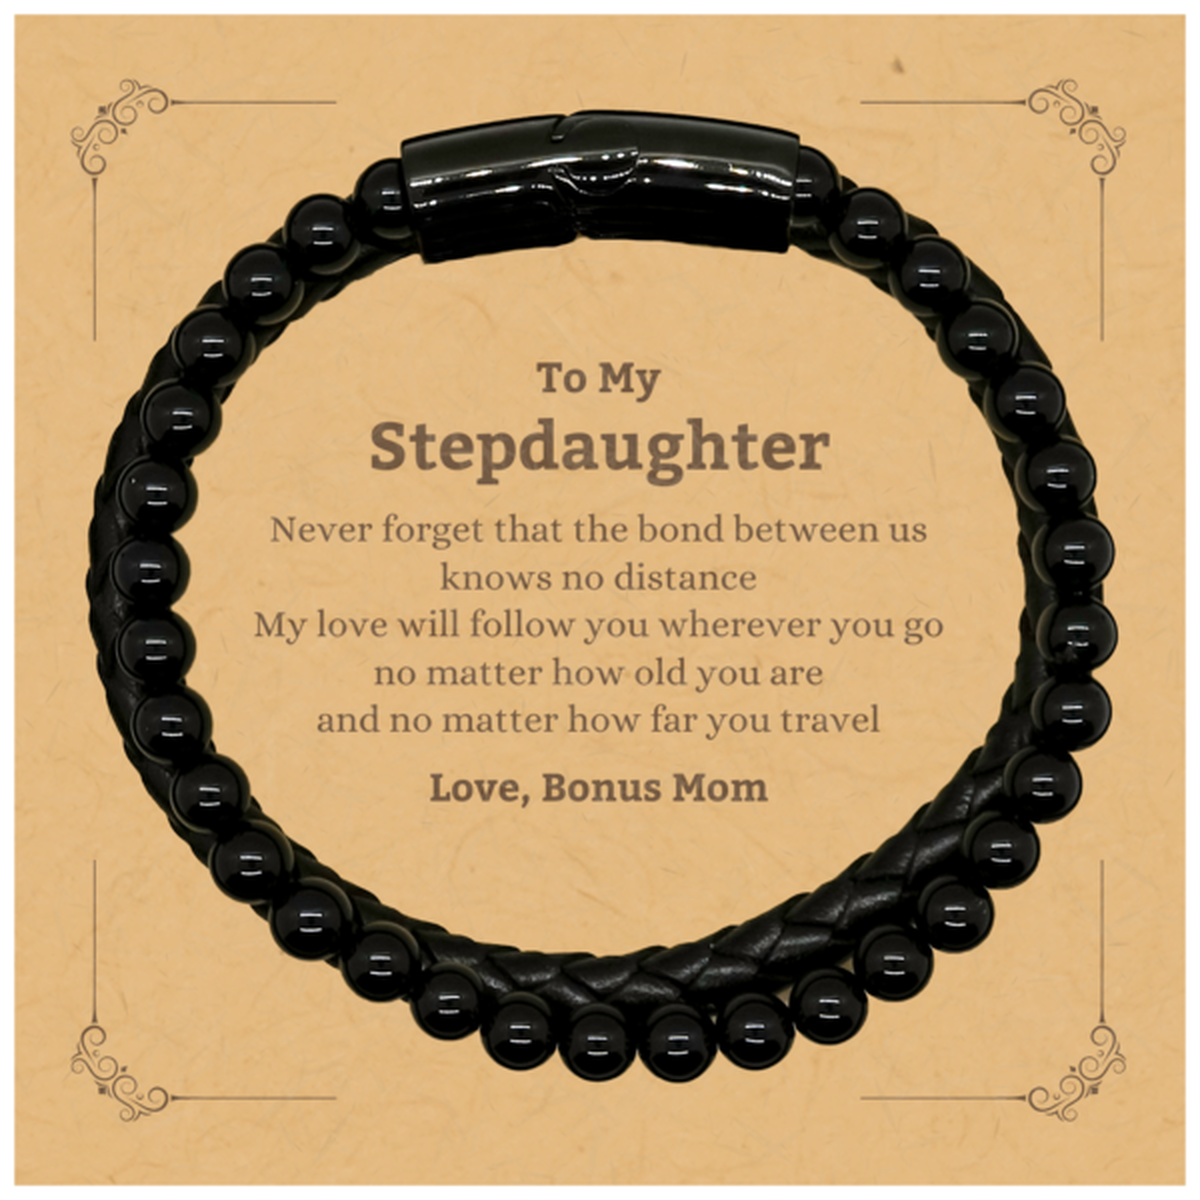 Stepdaughter Birthday Gifts from Bonus Mom, Adjustable Stone Leather Bracelets for Stepdaughter Christmas Graduation Unique Gifts Stepdaughter Never forget that the bond between us knows no distance. Love, Bonus Mom